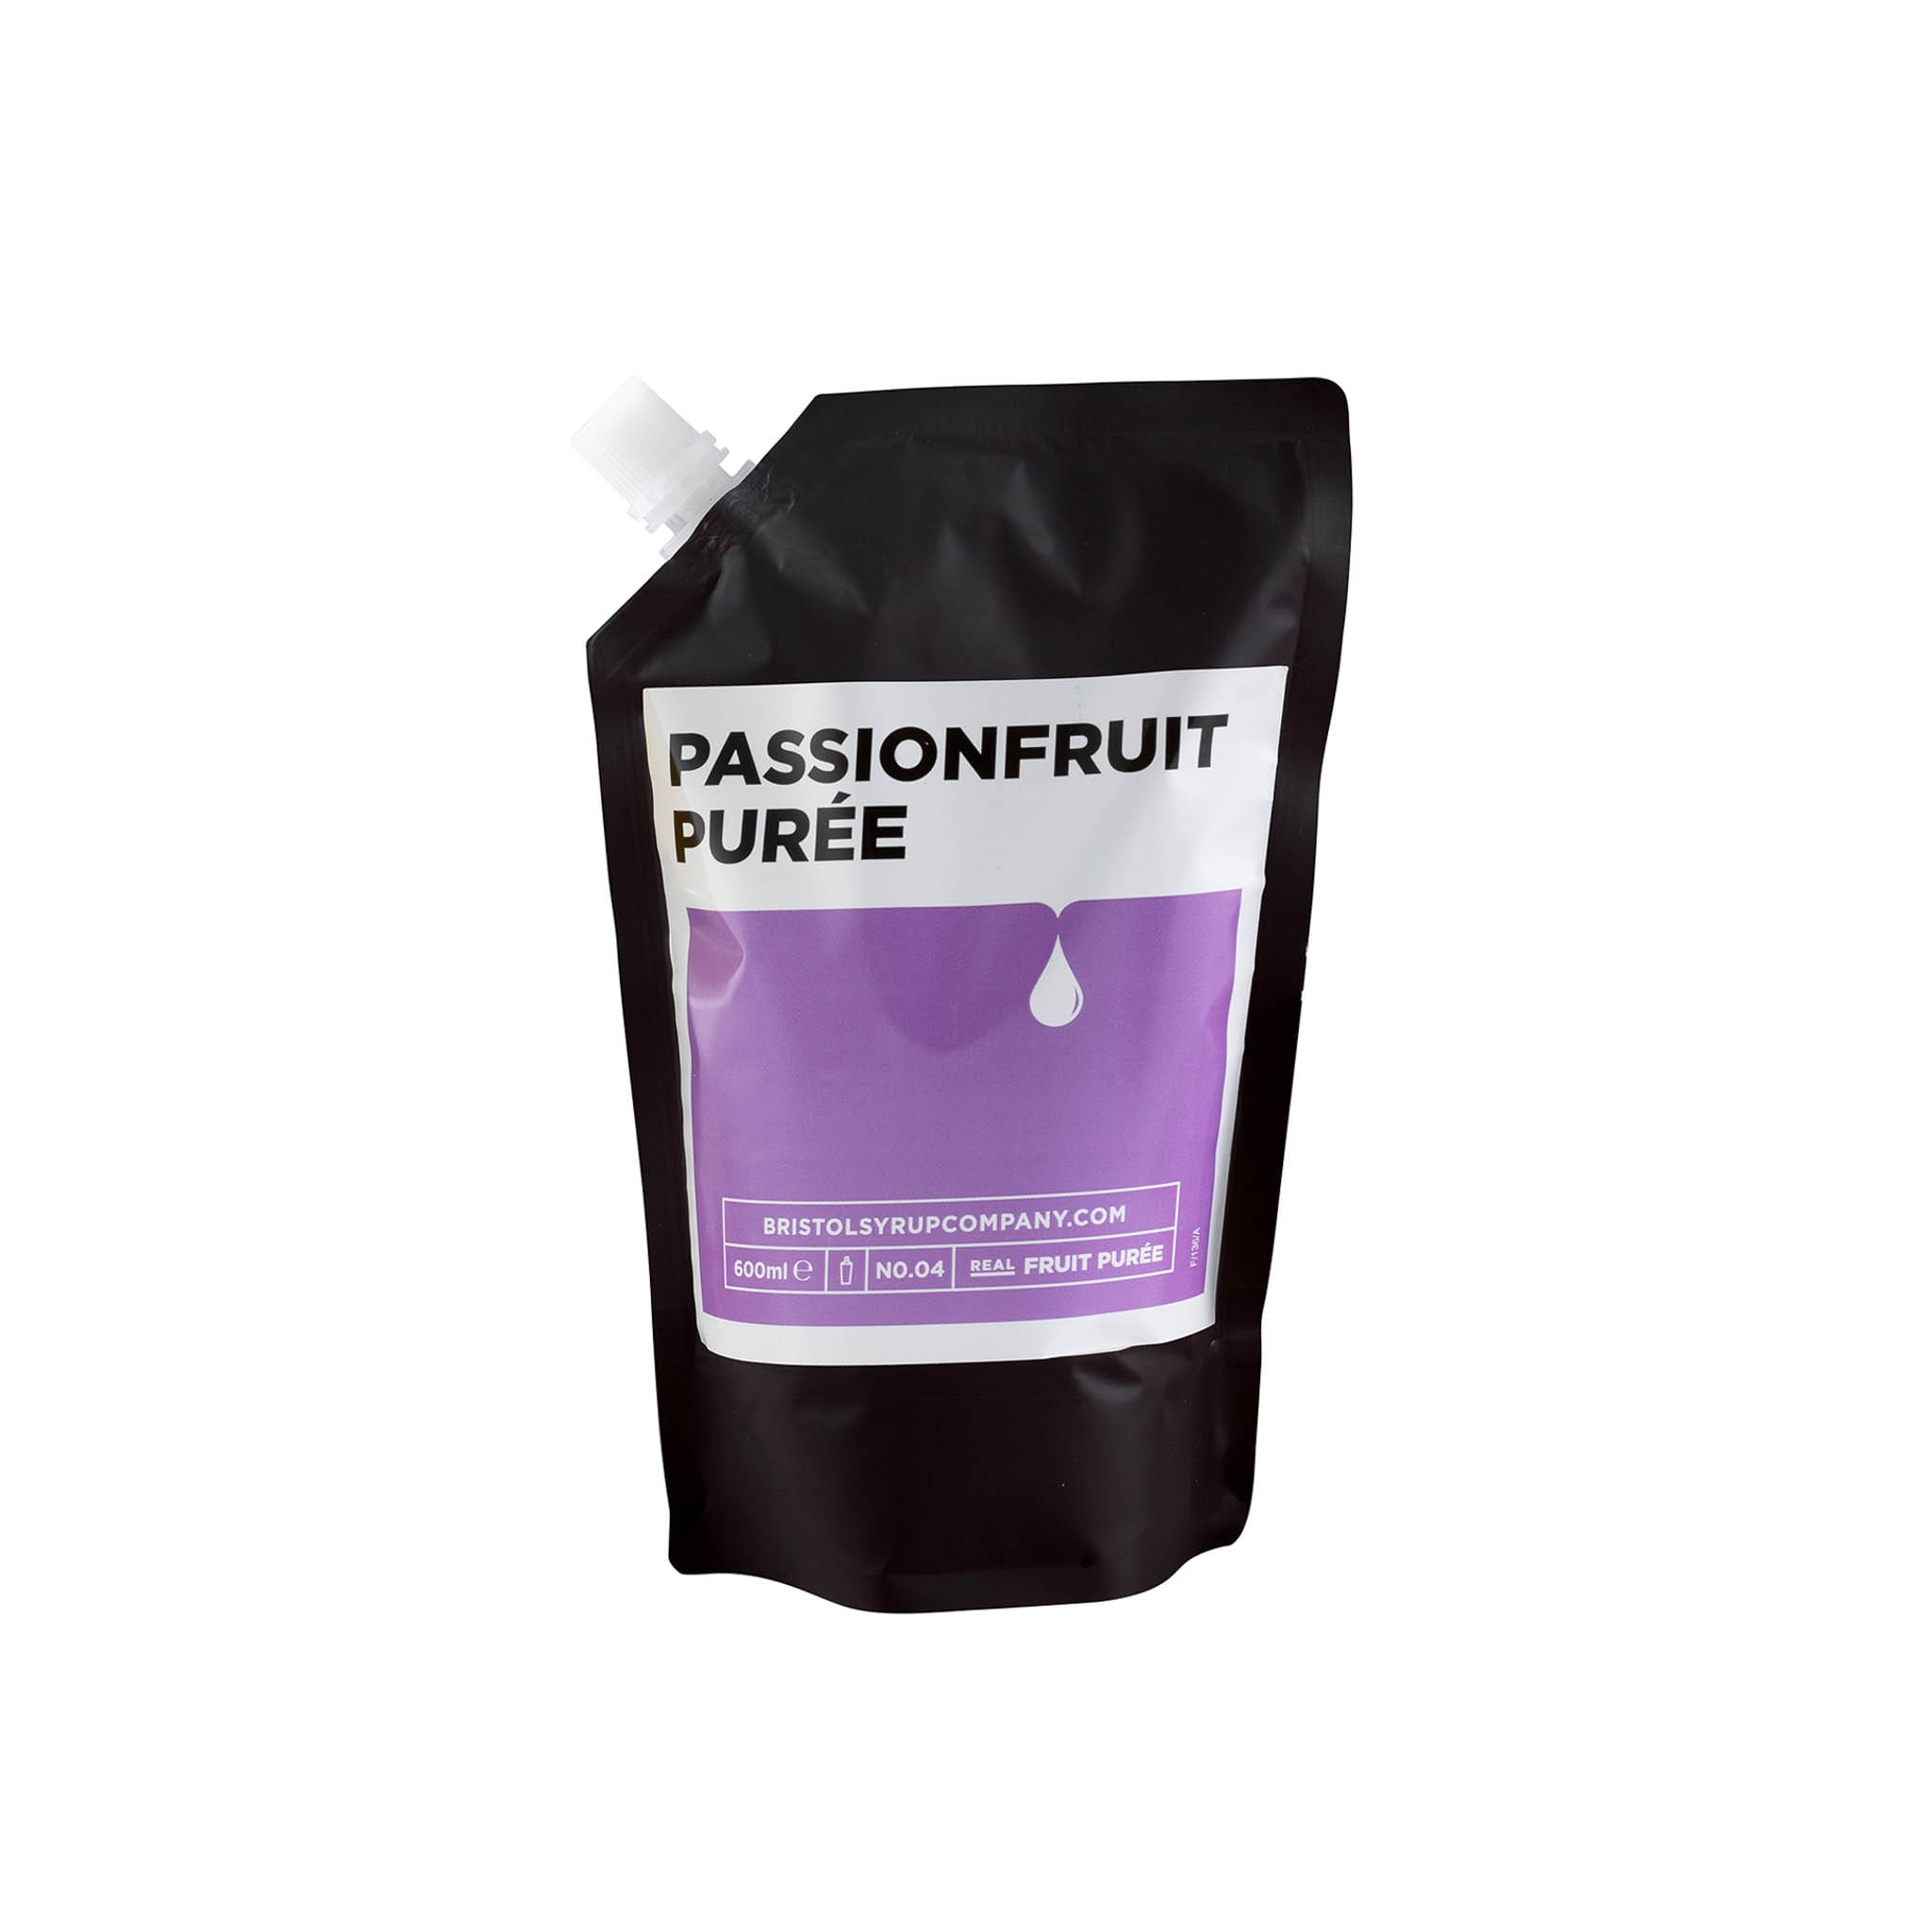 Bristol Syrup Co Passionfruit Puree, 600ml